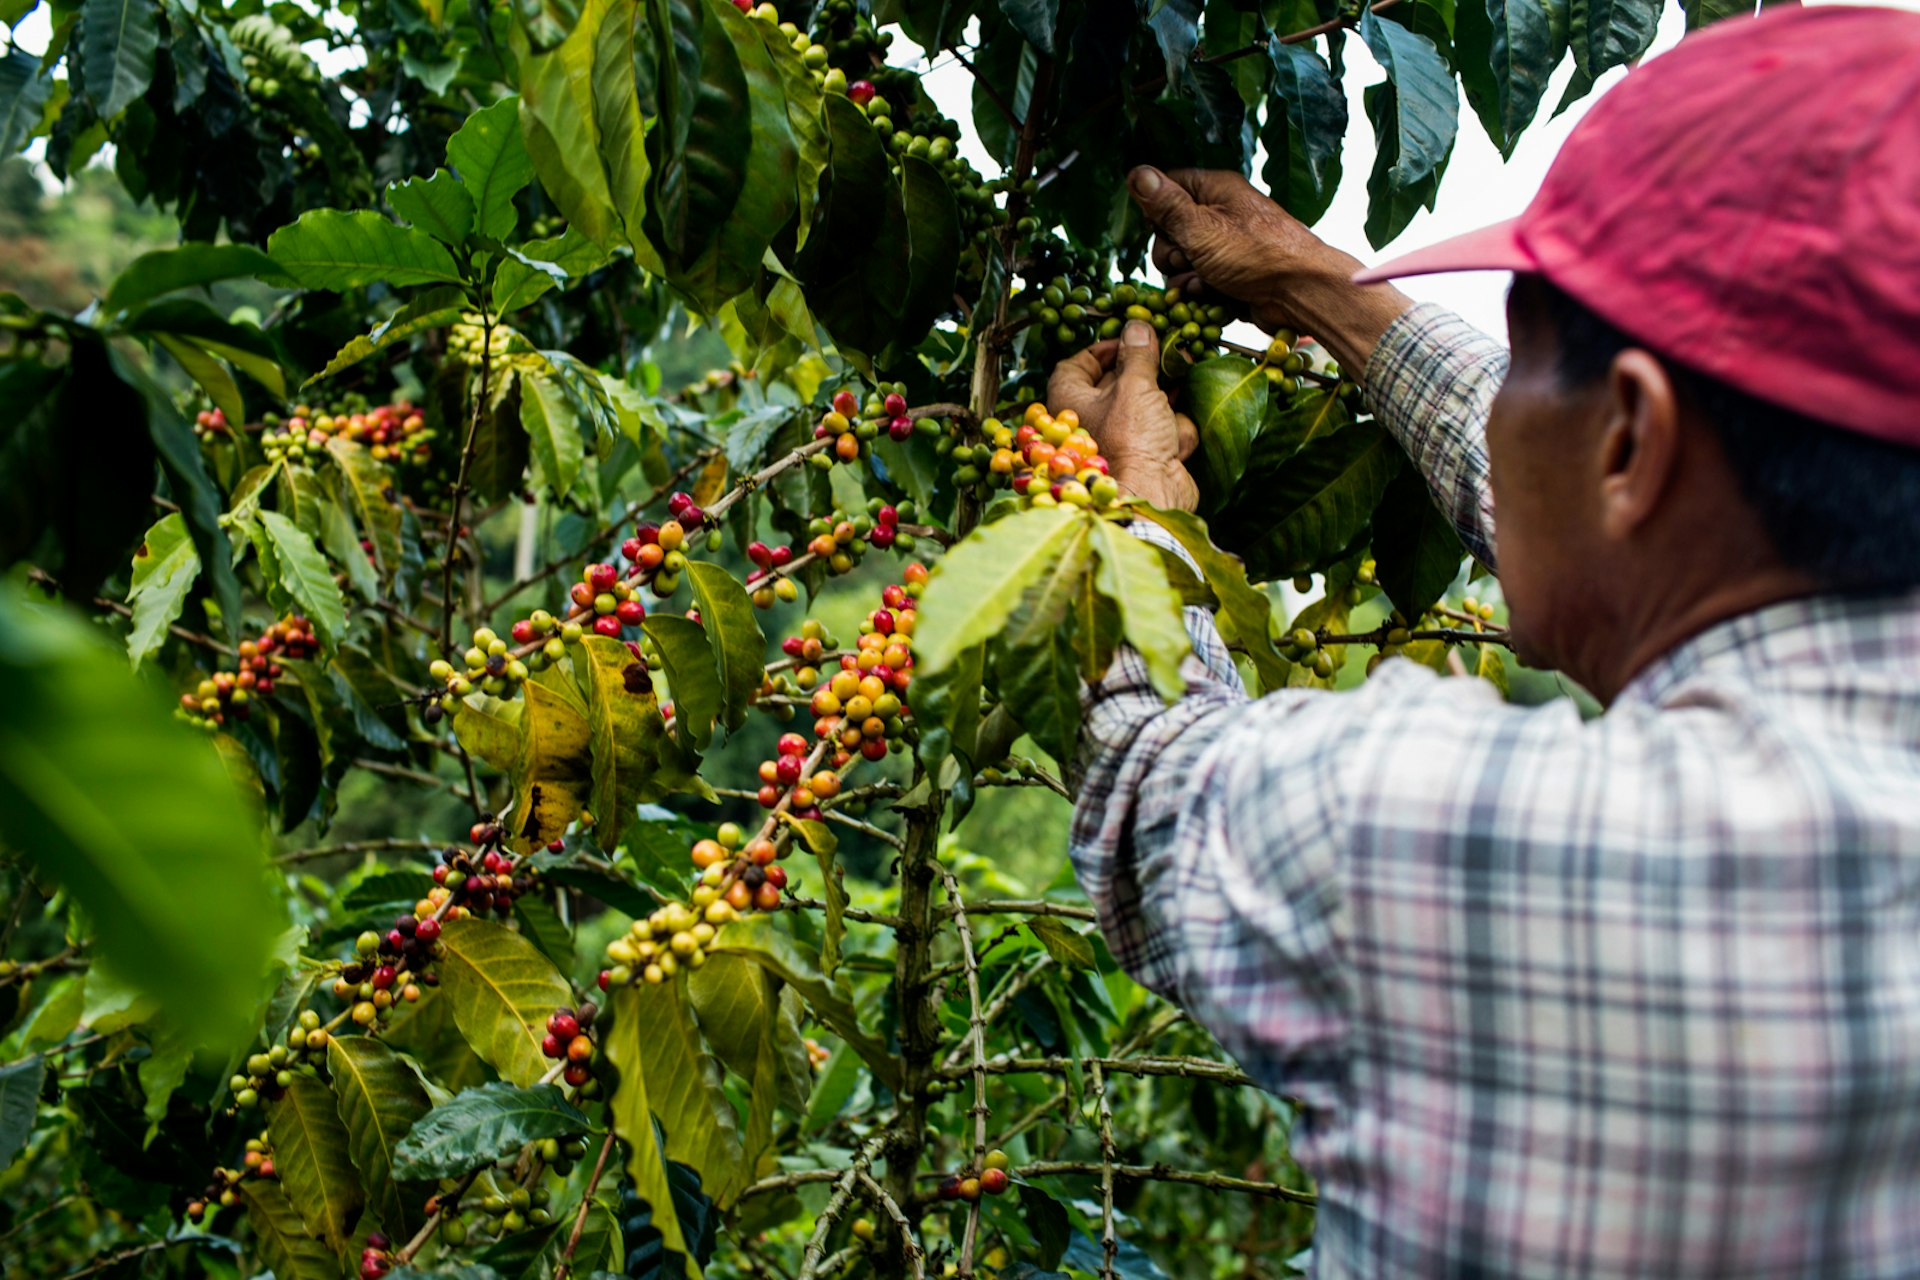 A man wearing a red hat and checked shirt picks cherries from a coffee tree in the rural highlands of Colombia's Coffee Triangle to make Colombian coffee